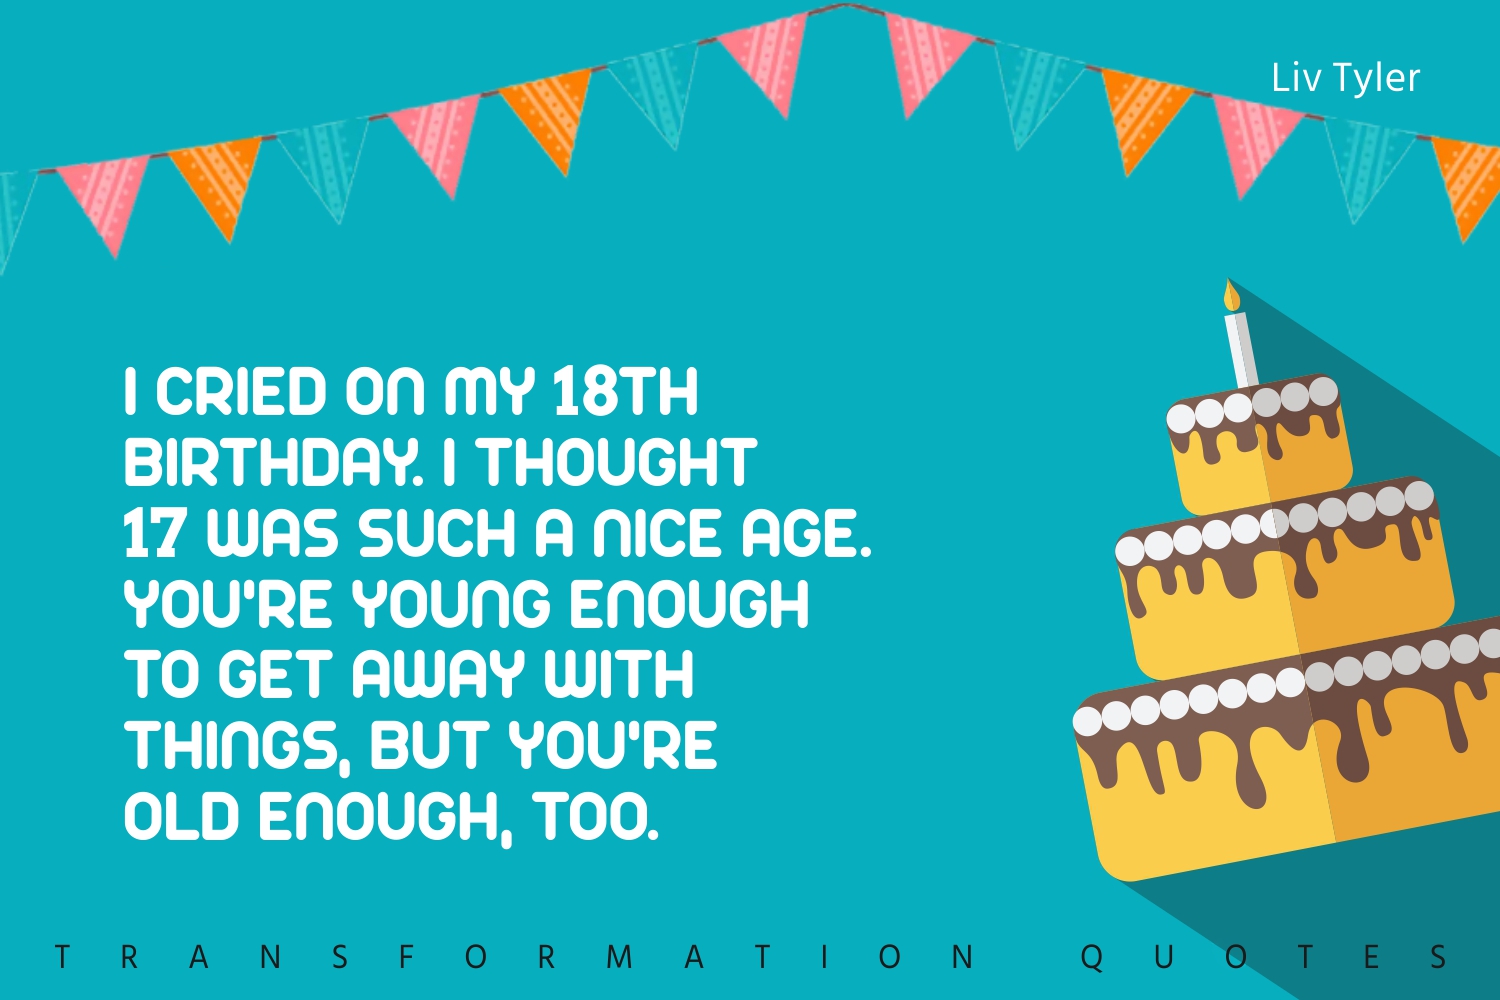 10 Birthday Quotes That Will Inspire You | TransformationQuotes